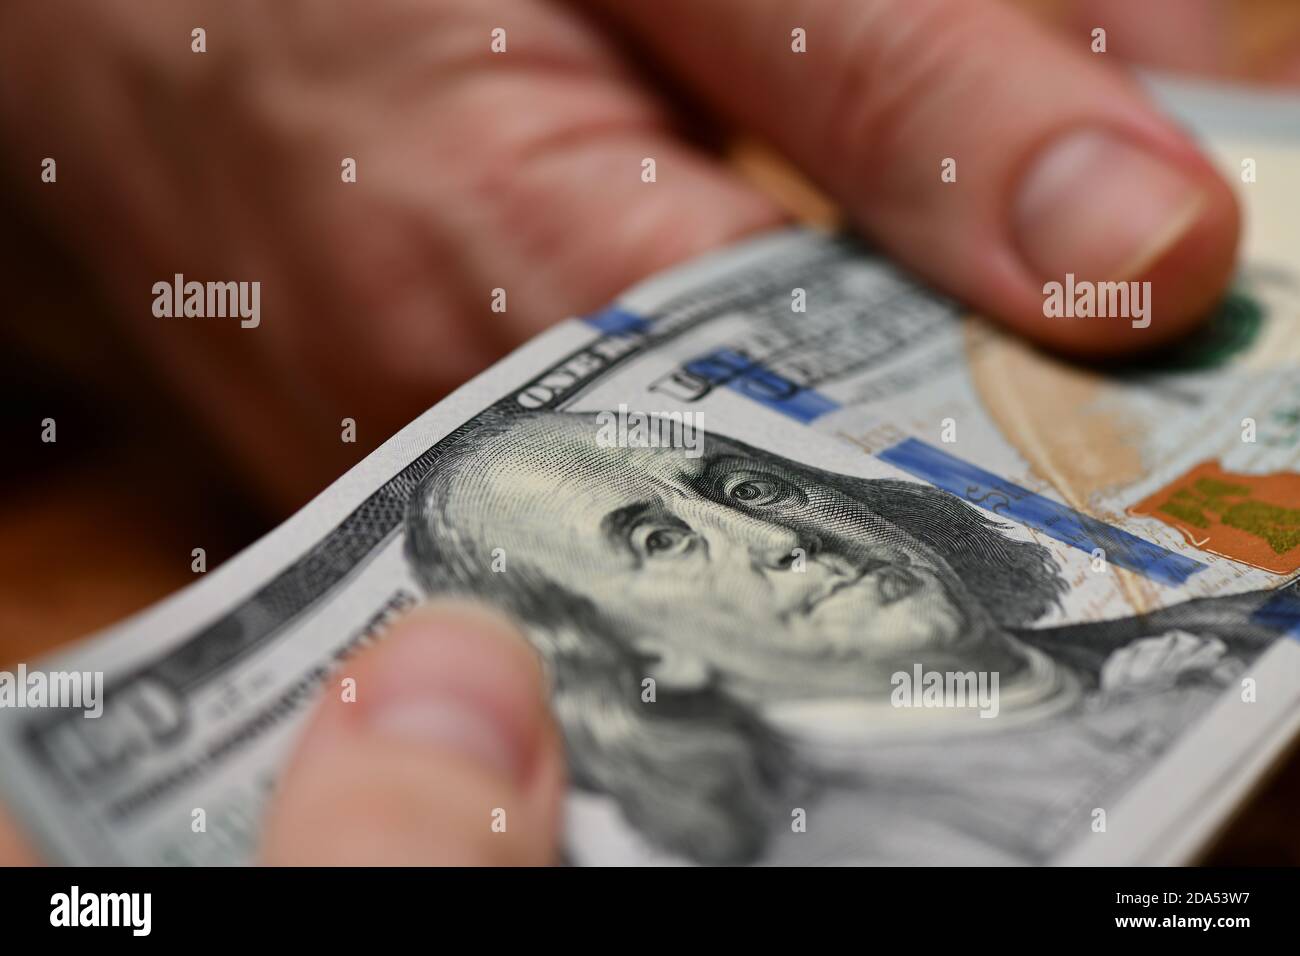 Dollars closeup. United States dollar cash money. Transfer of funds. One hundred dollar banknotes, currency exchange, bribe, investment concept. Stock Photo